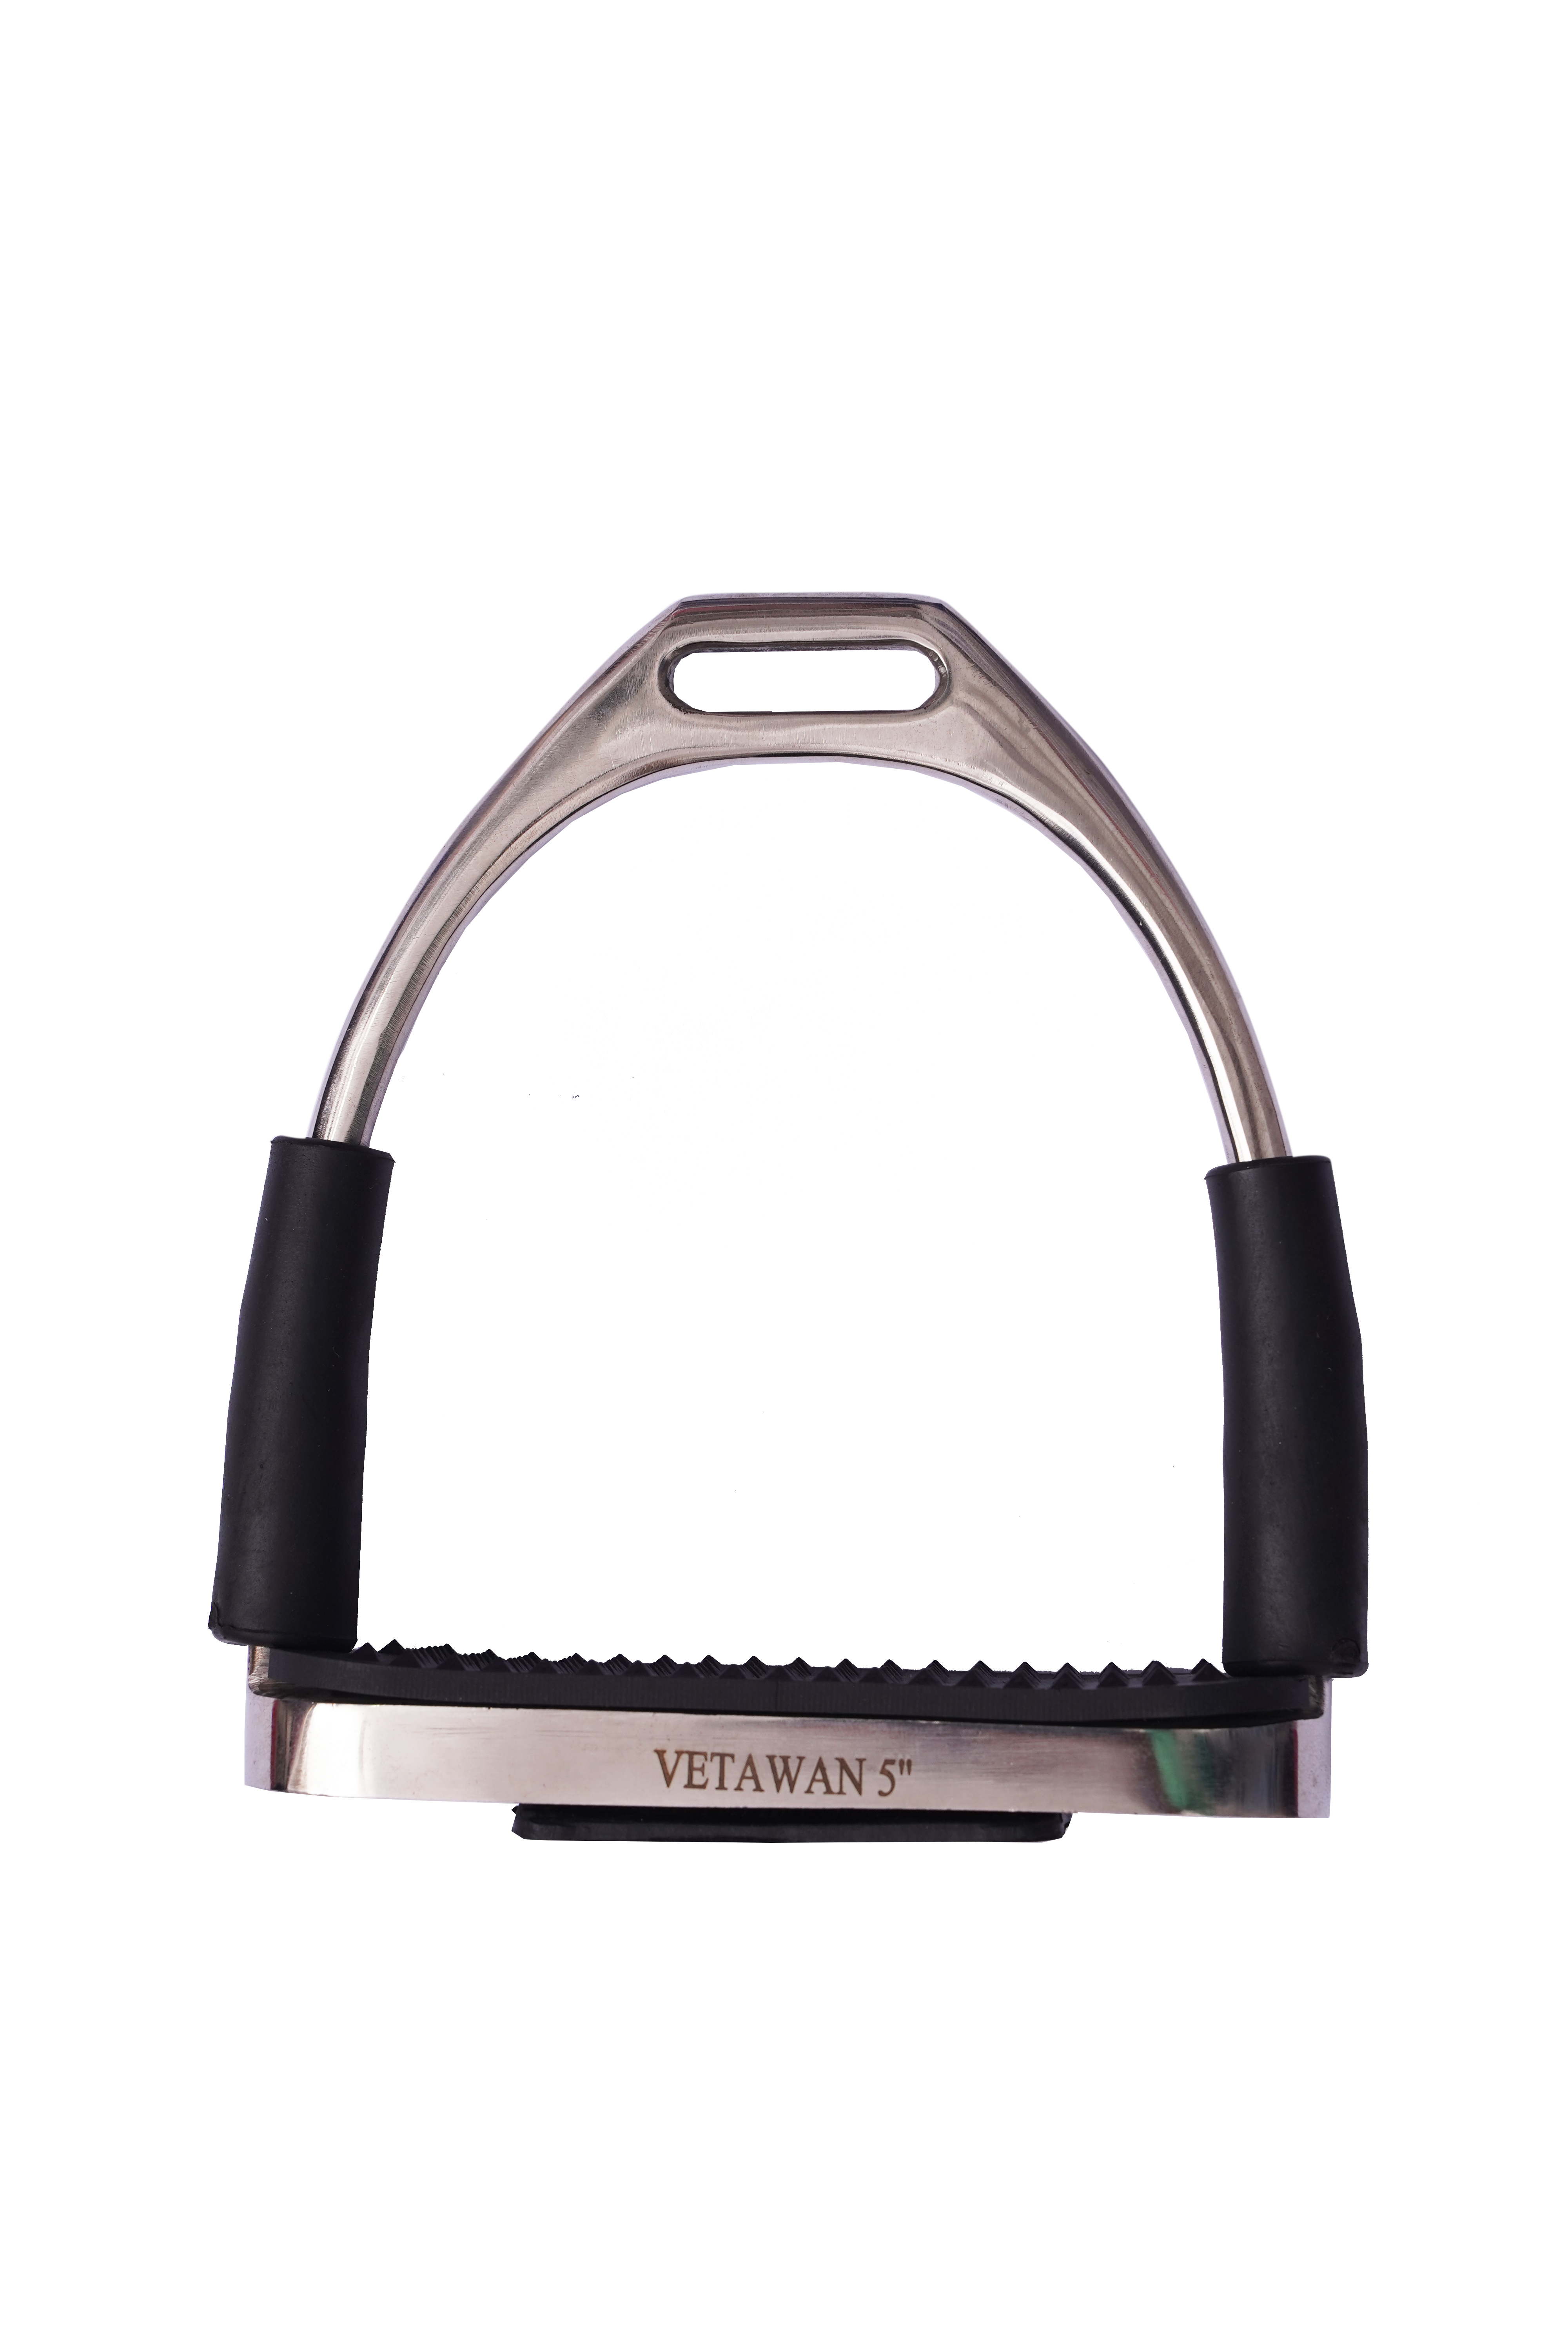 Vawan Security stirrup with rubber band 4.75 inch